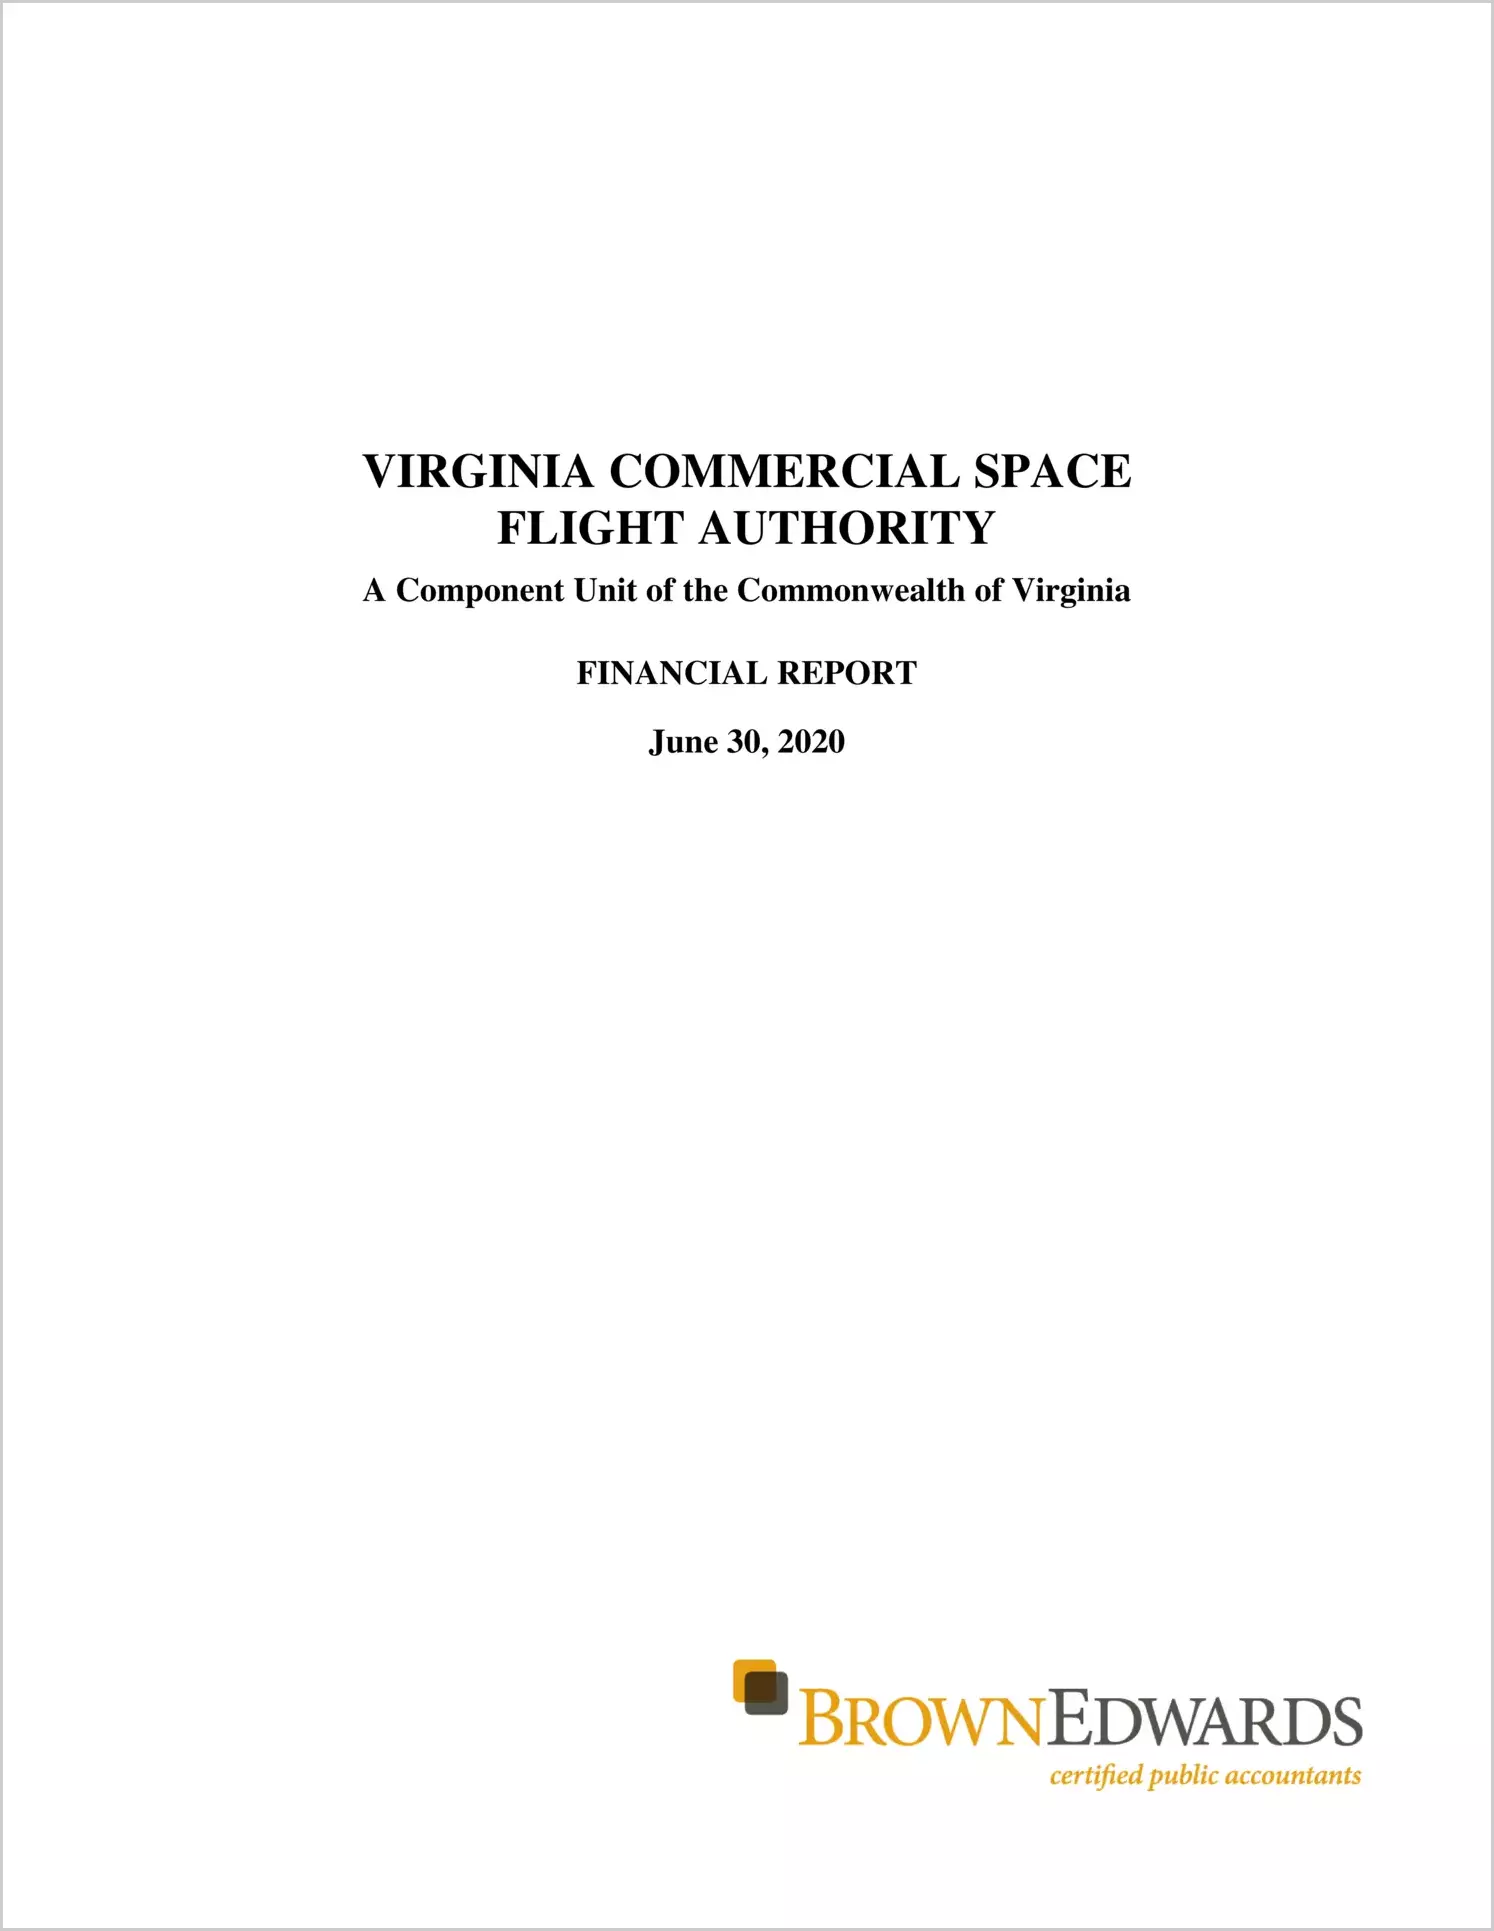 Virginia Commercial Space Flight Authority Financial Statements for the year ended June 30, 2020